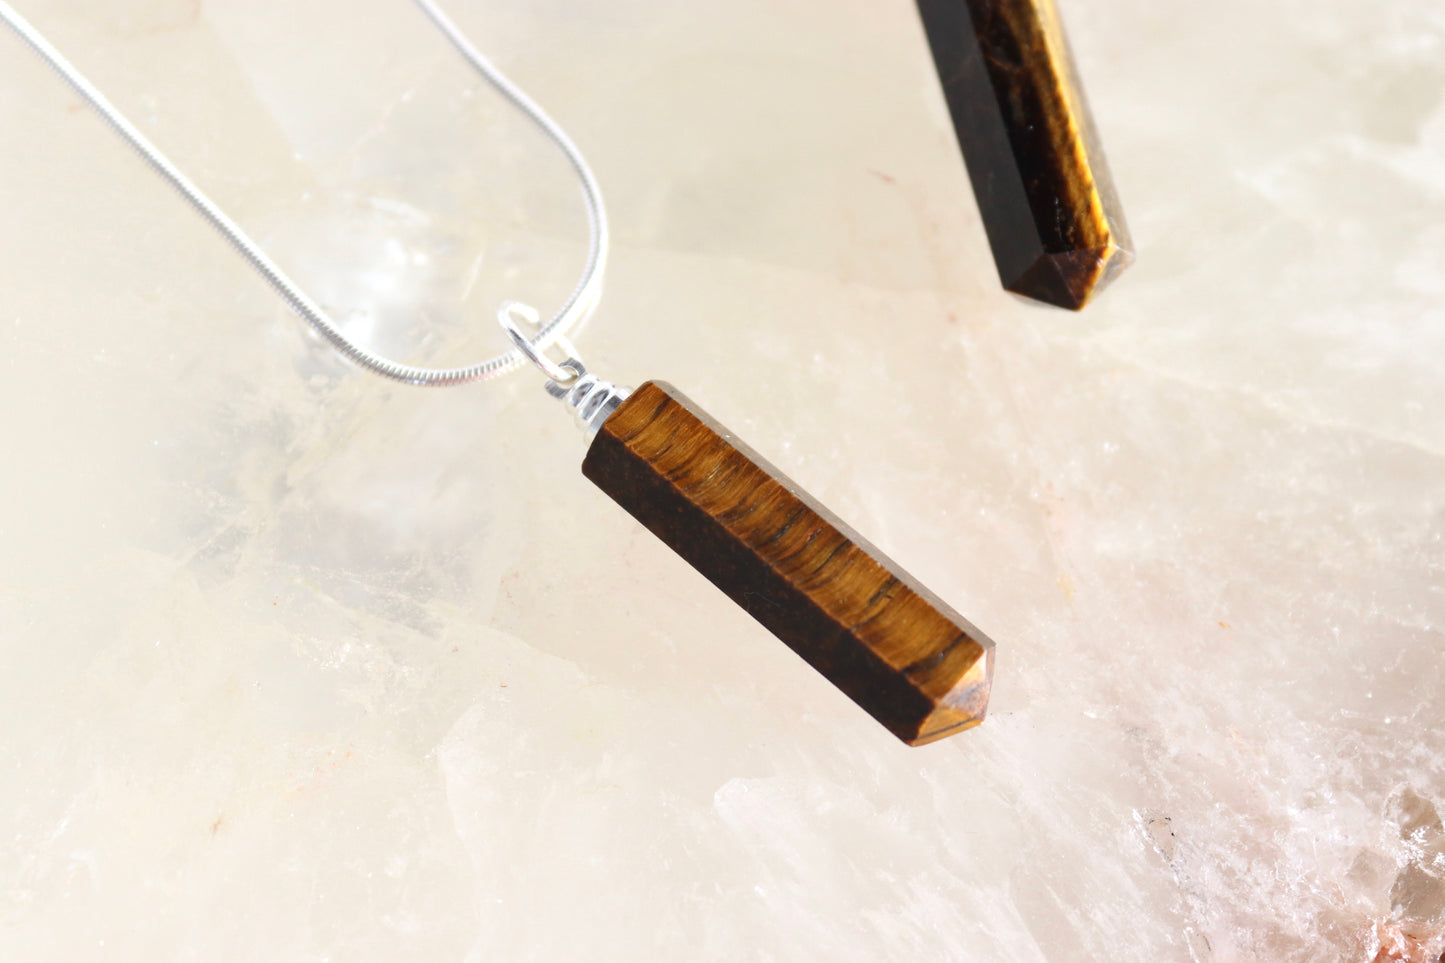 Golden - TIGERS EYE necklace